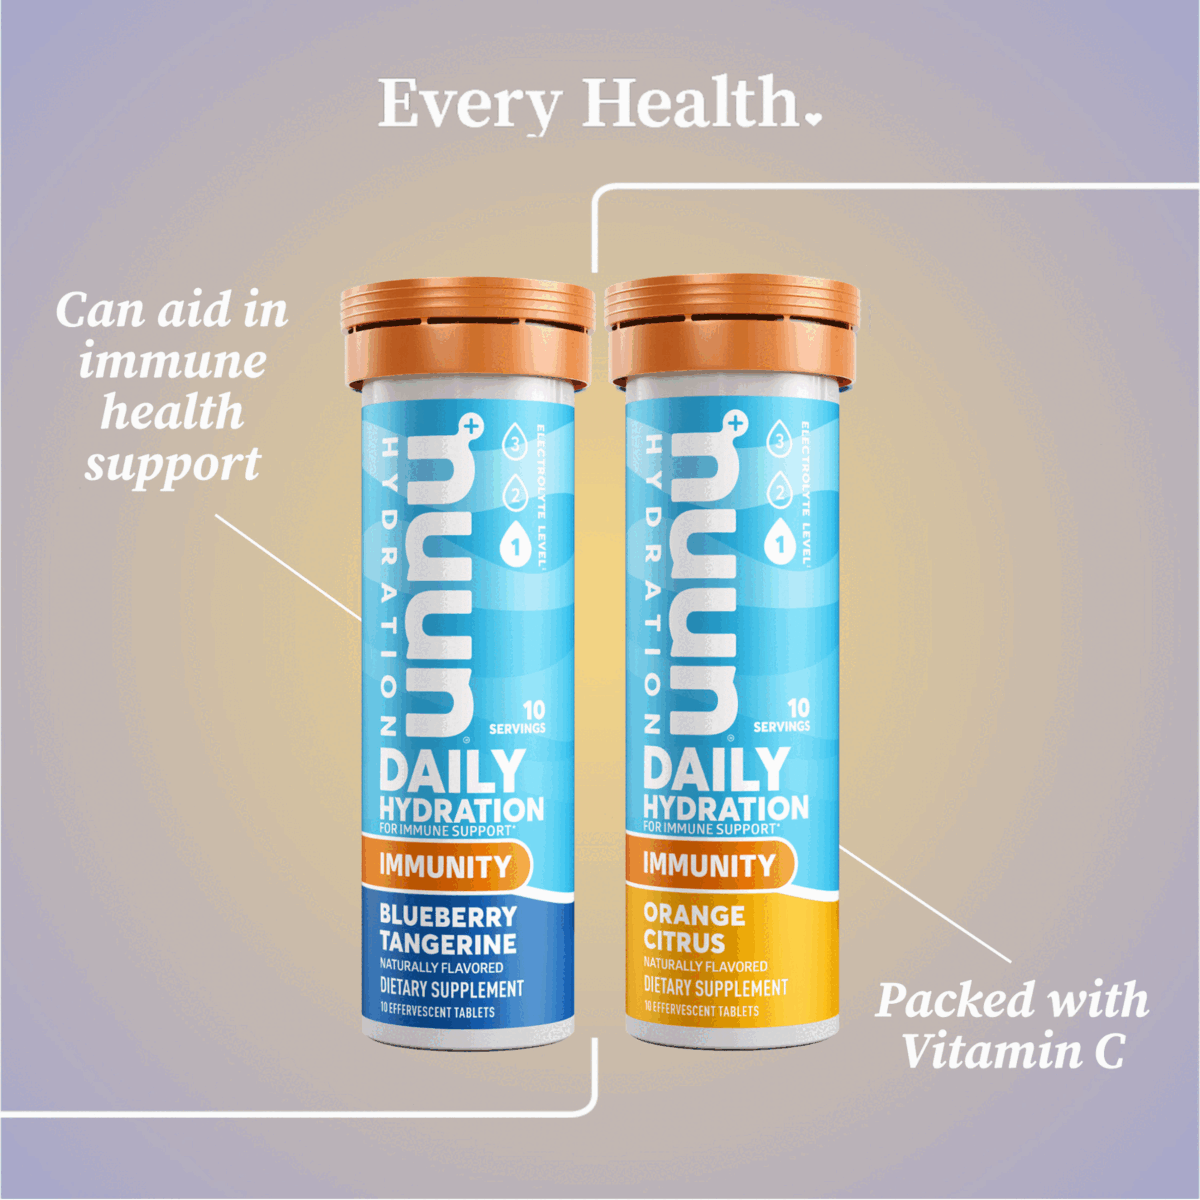 Every Health. Can aid in immune health support. Packed with Vitamin C. Free Nuun Sample on orders £50+